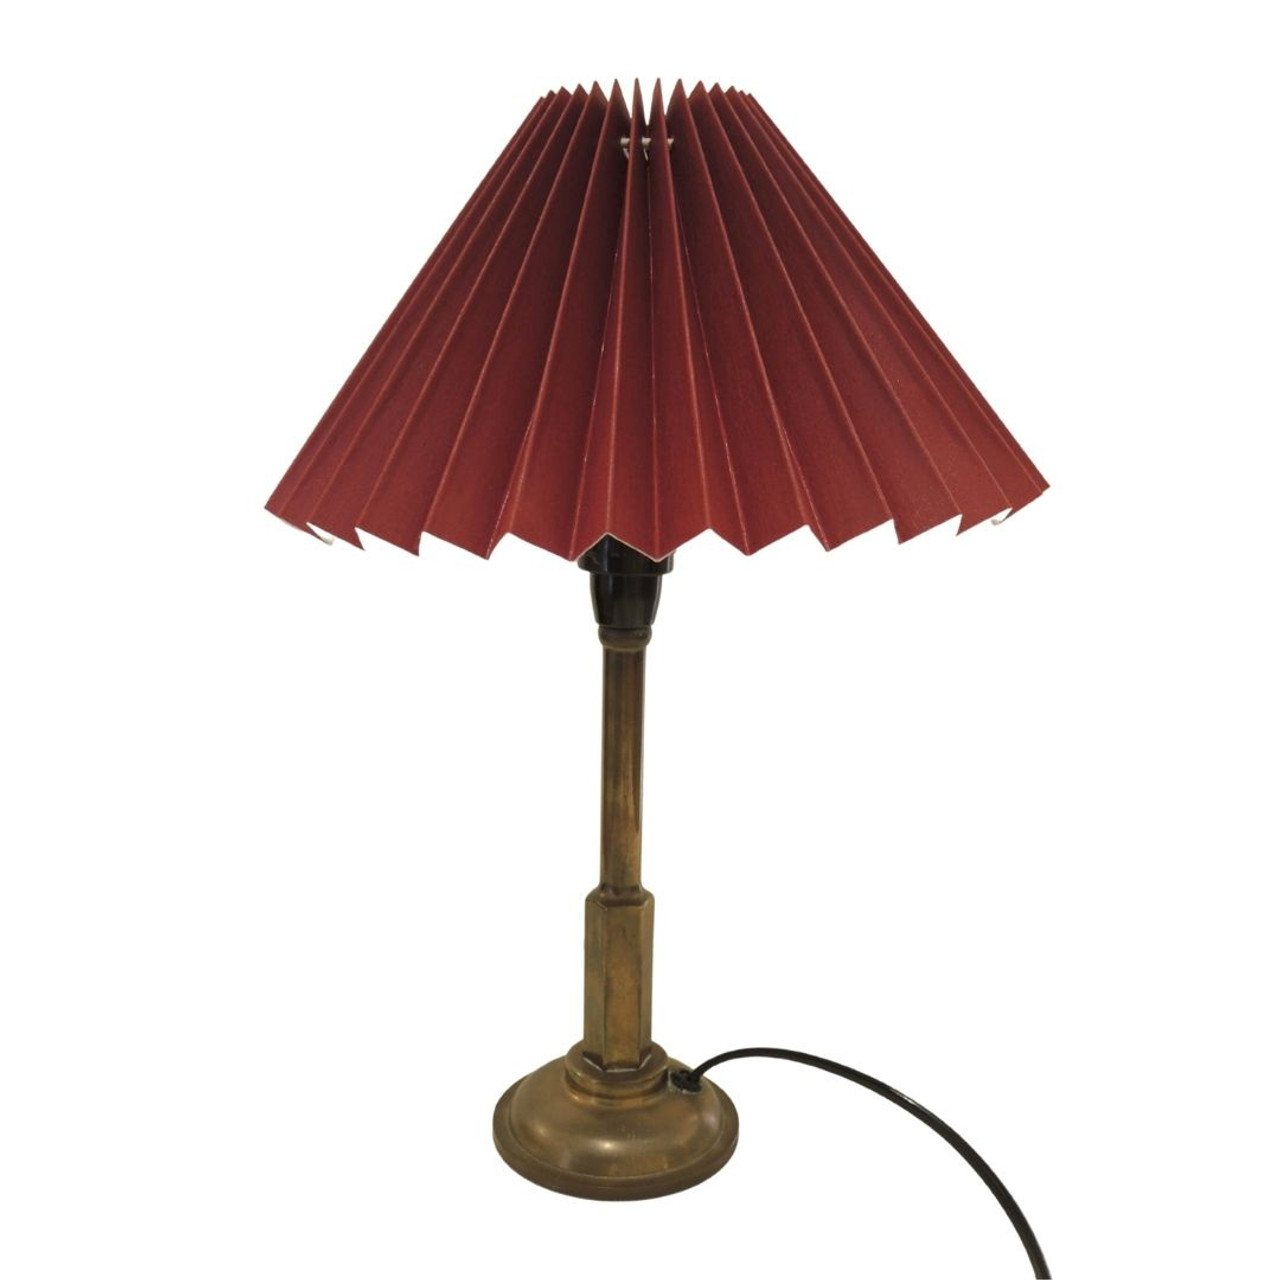 Small Vintage Brass Table or Bedside Lamp with Pleated Shade - In